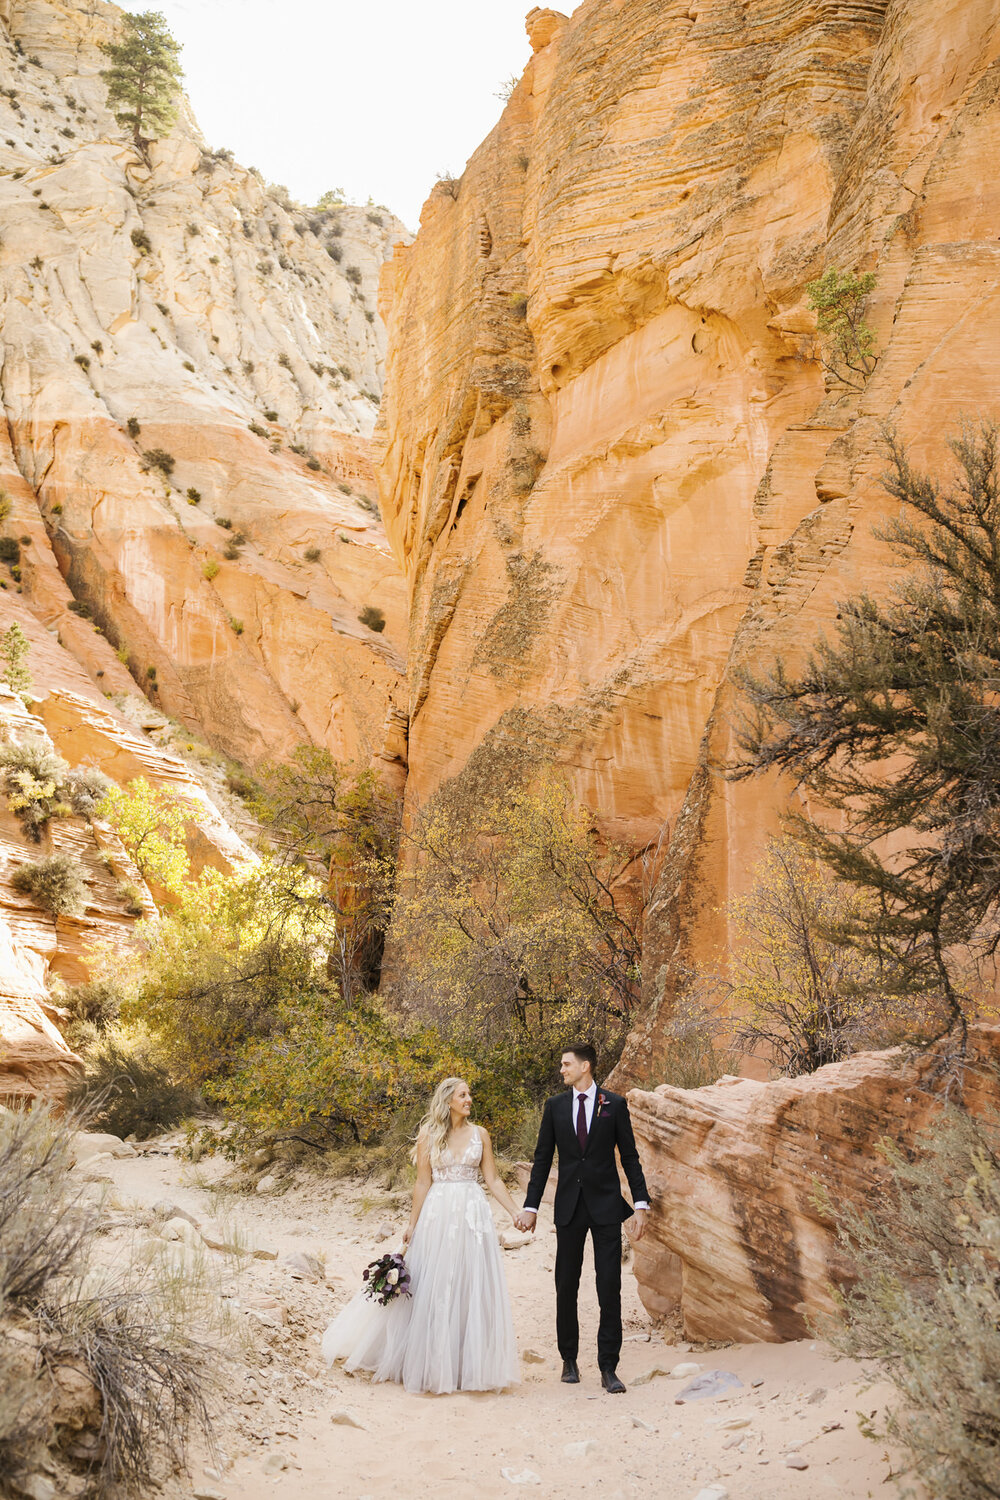 The day after their wedding, a couple walk holding hands for their portraits in the Utah desert